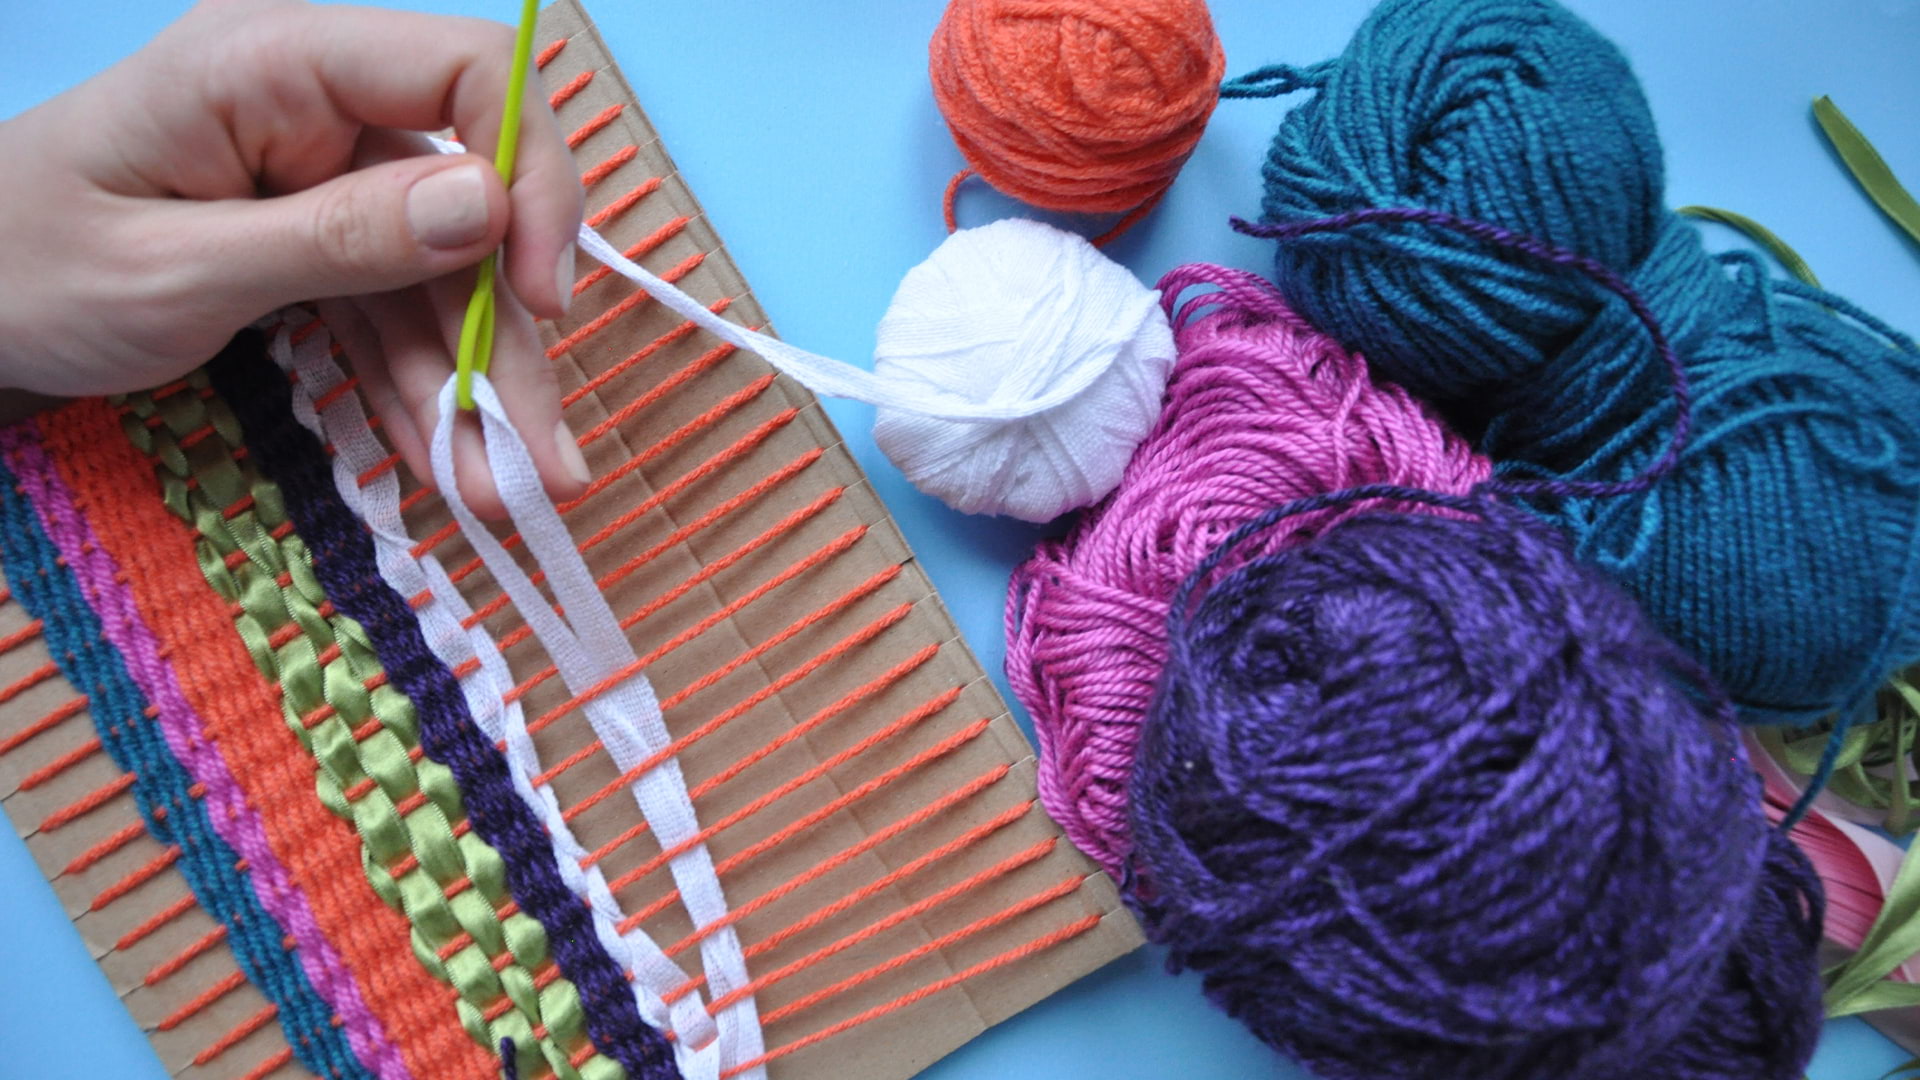 Weaving with Colorful Fabric